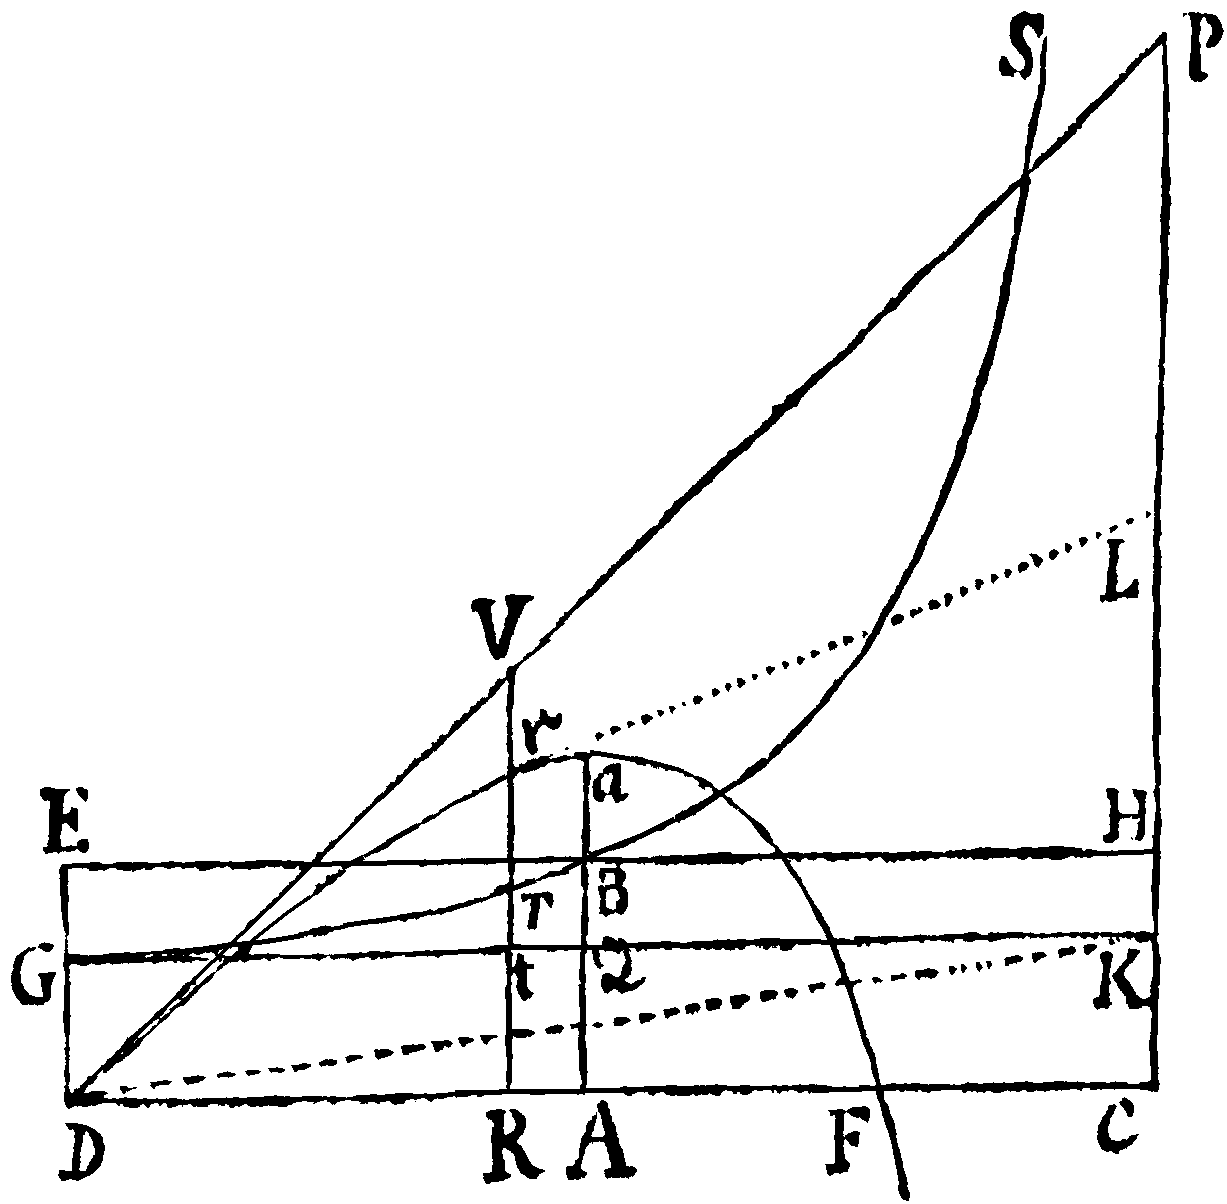 Figure for Prop. IV.